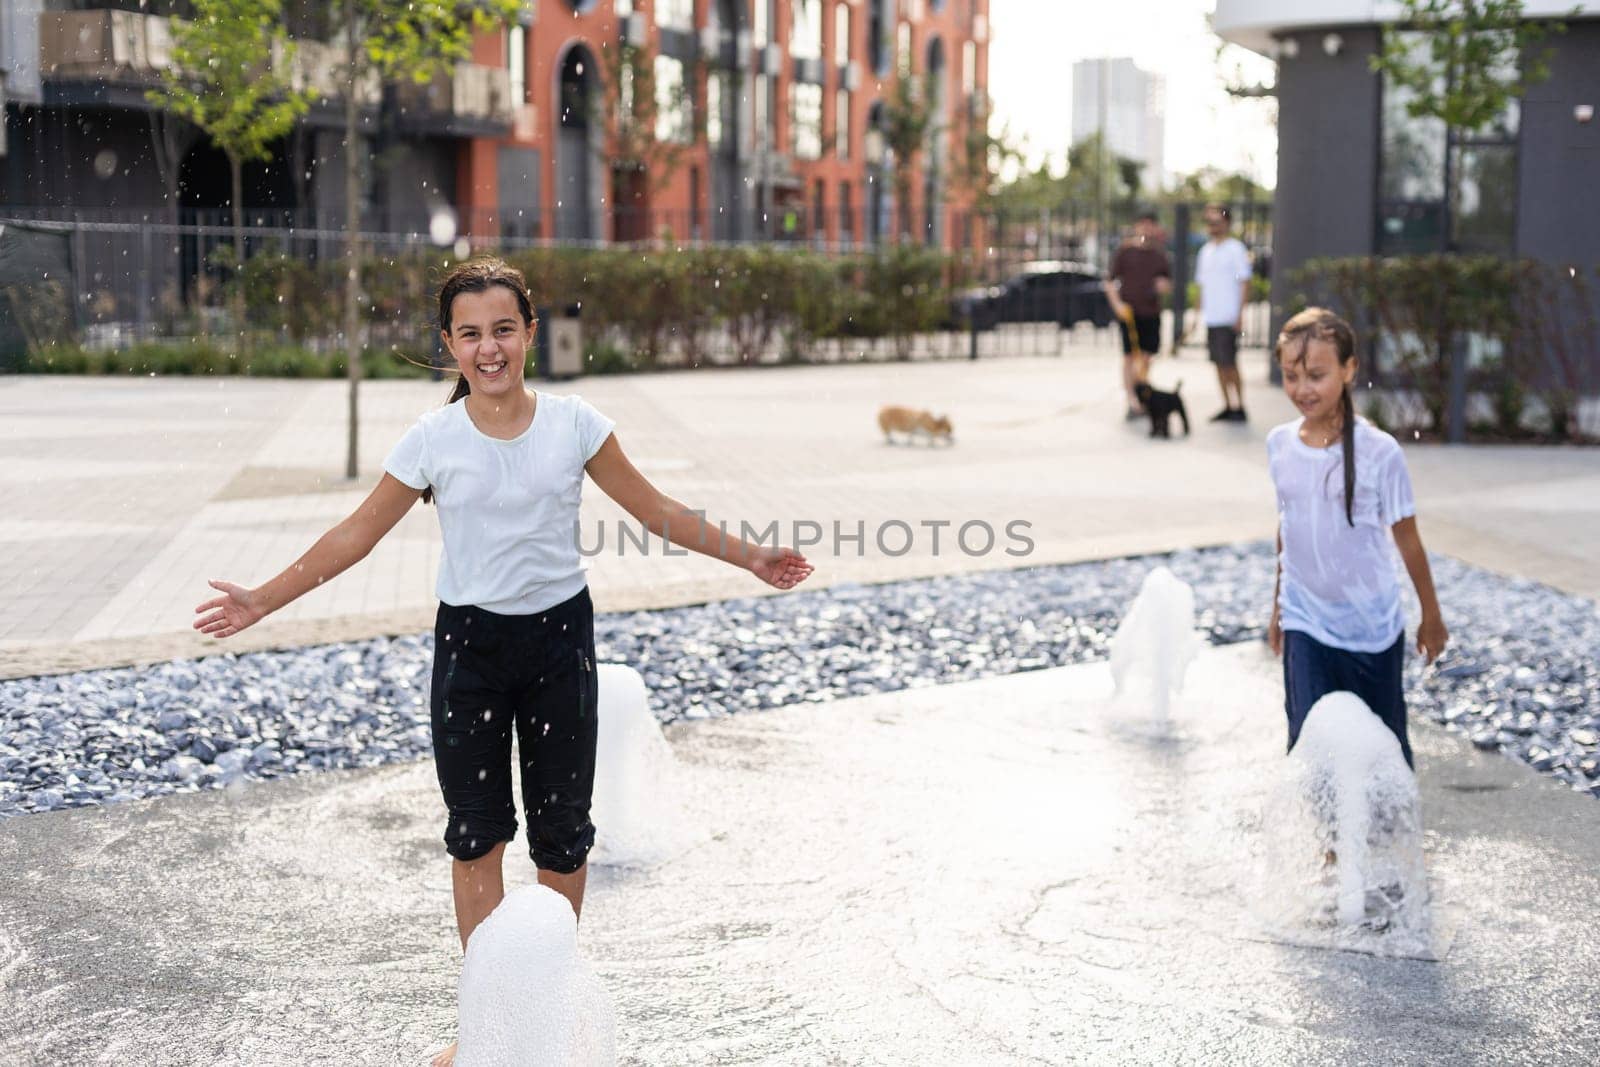 On a hot day, children run and have fun at the city fountain. Leisure time concept. summer holidays. happy childhood. High quality photo